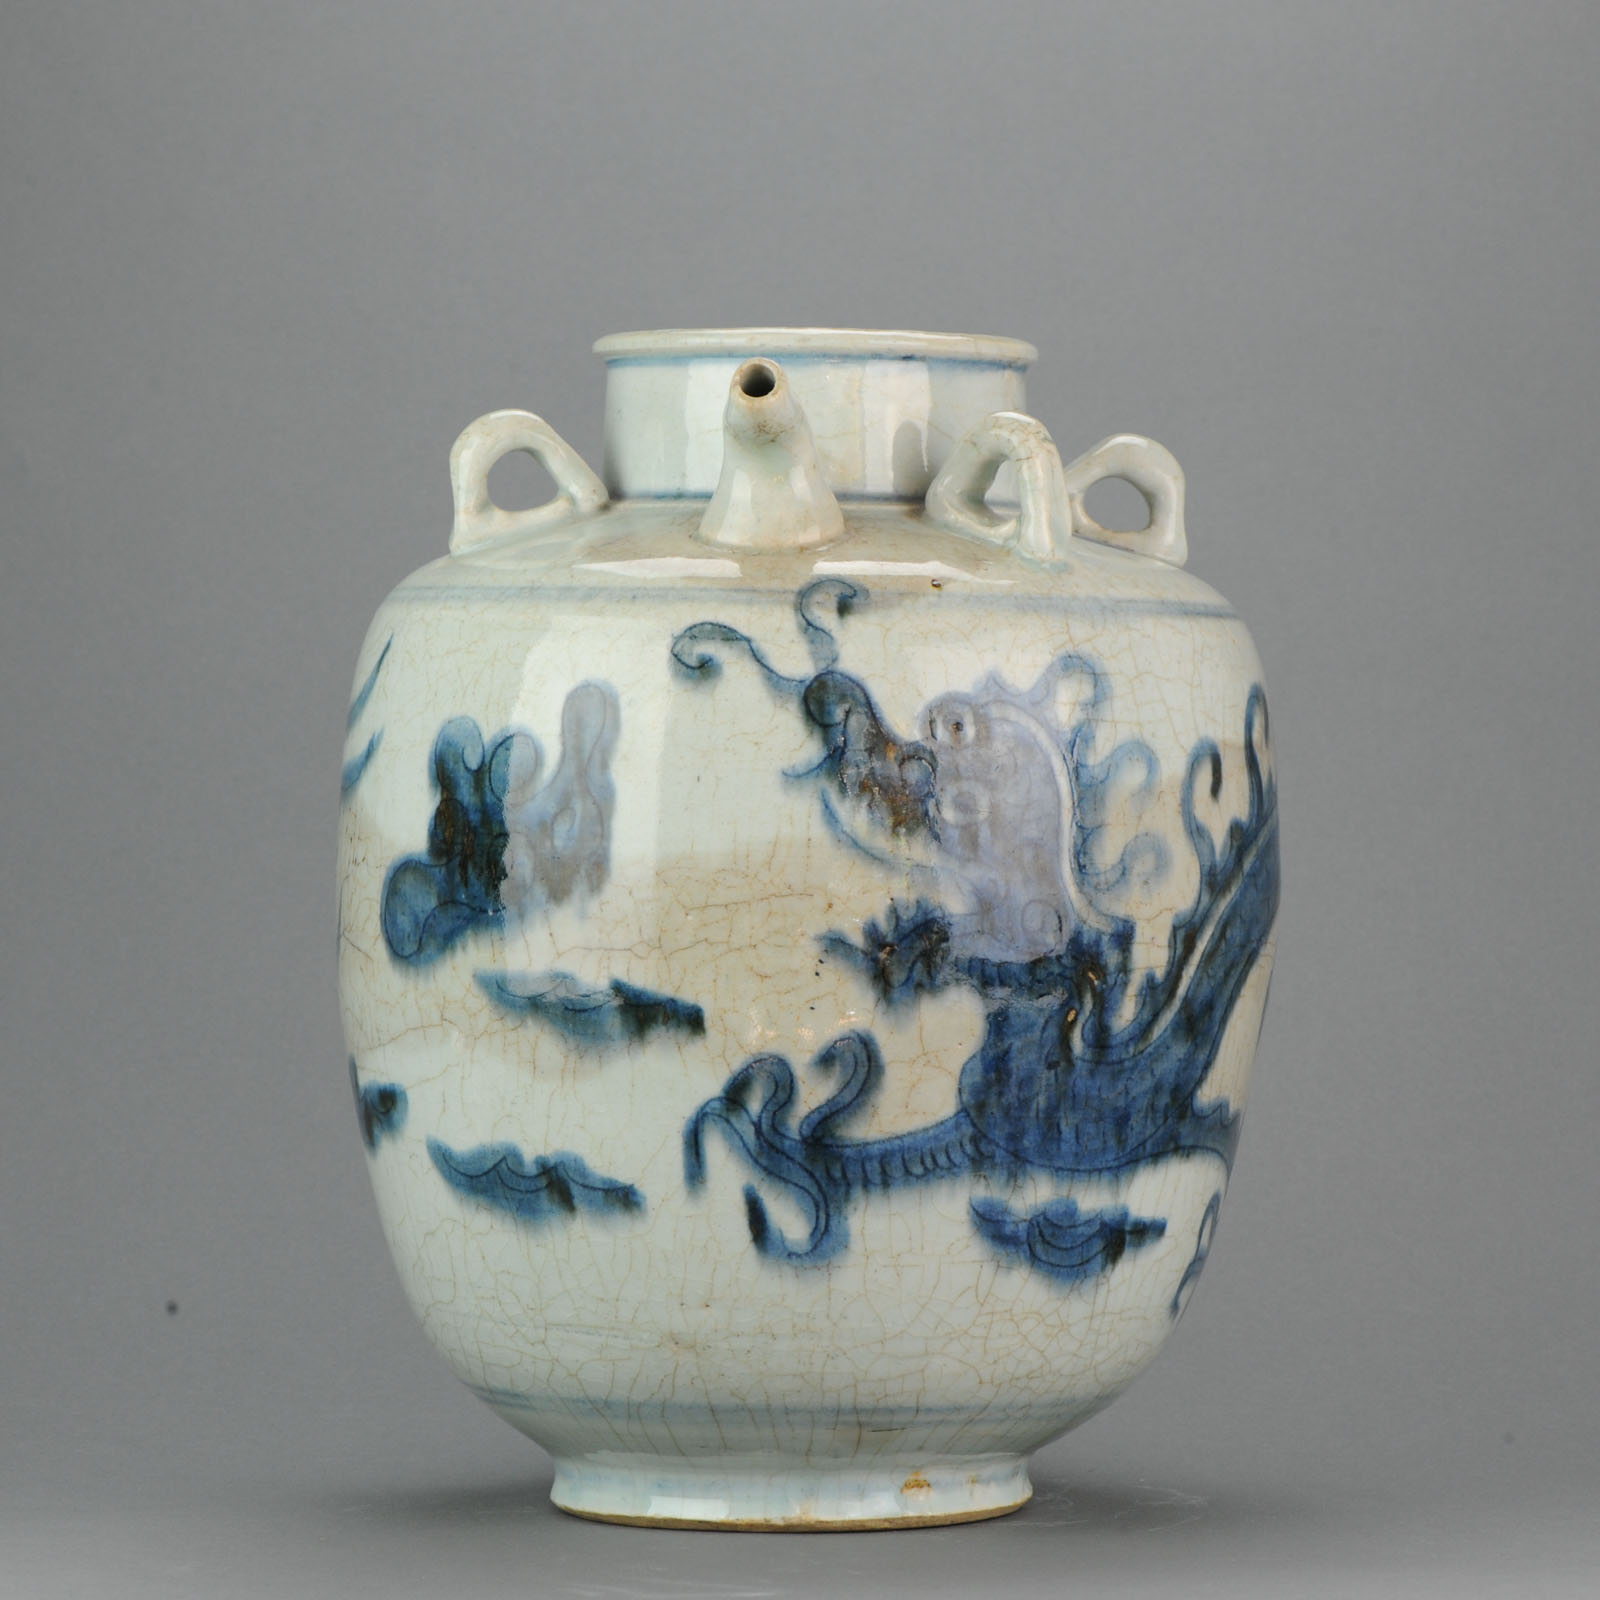 Chinese porcelain water cooler 19th century. South east market.